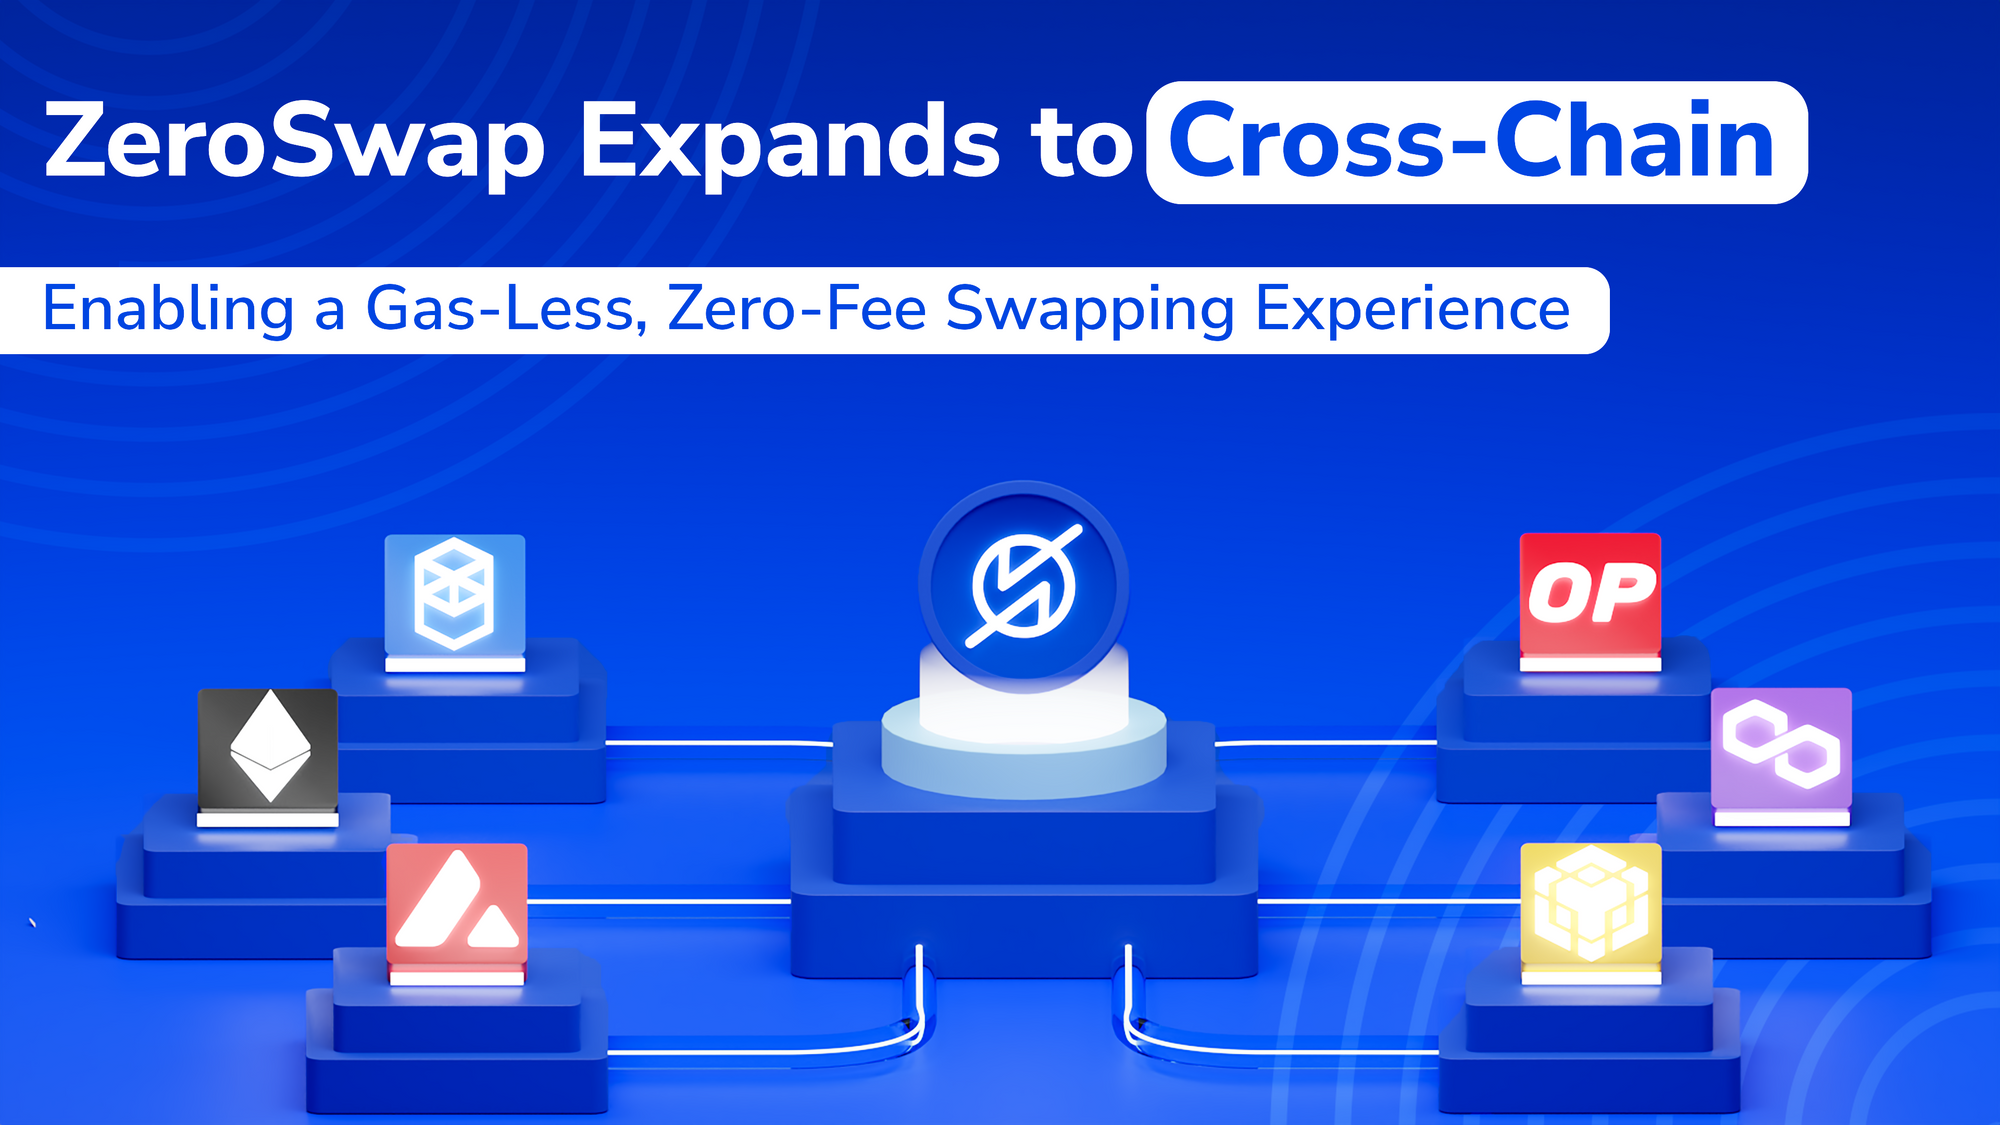 ZeroSwap Expands to Cross-Chain; Enabling Gasless and Zero Fee Swapping Experience